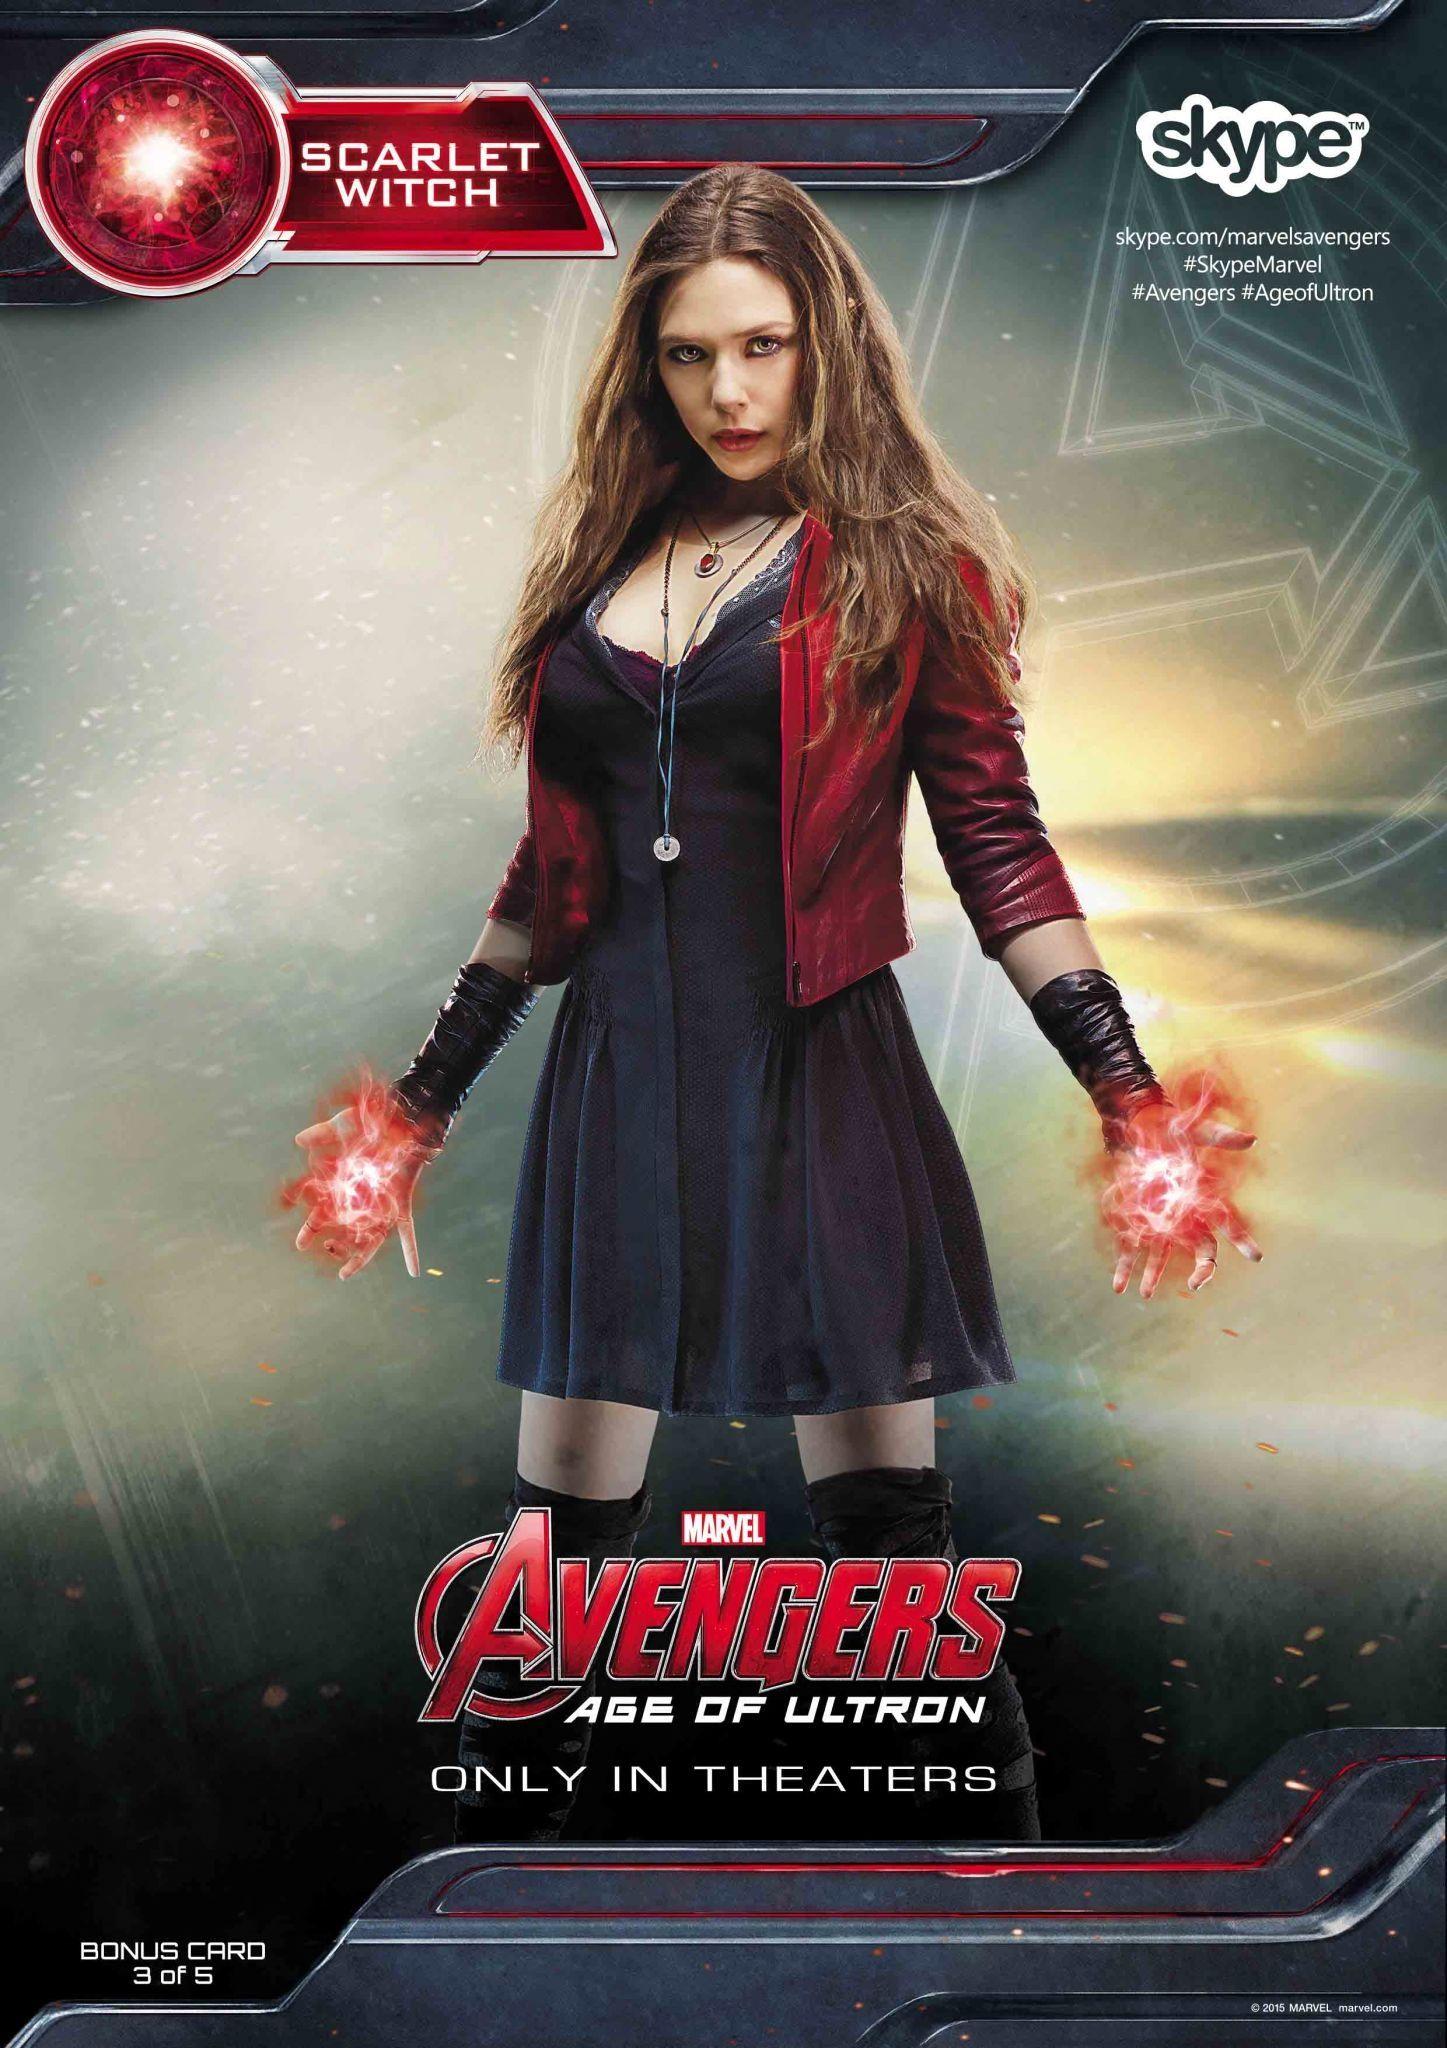 Wanda & Pietro image Scarlet Witch HD wallpaper and background